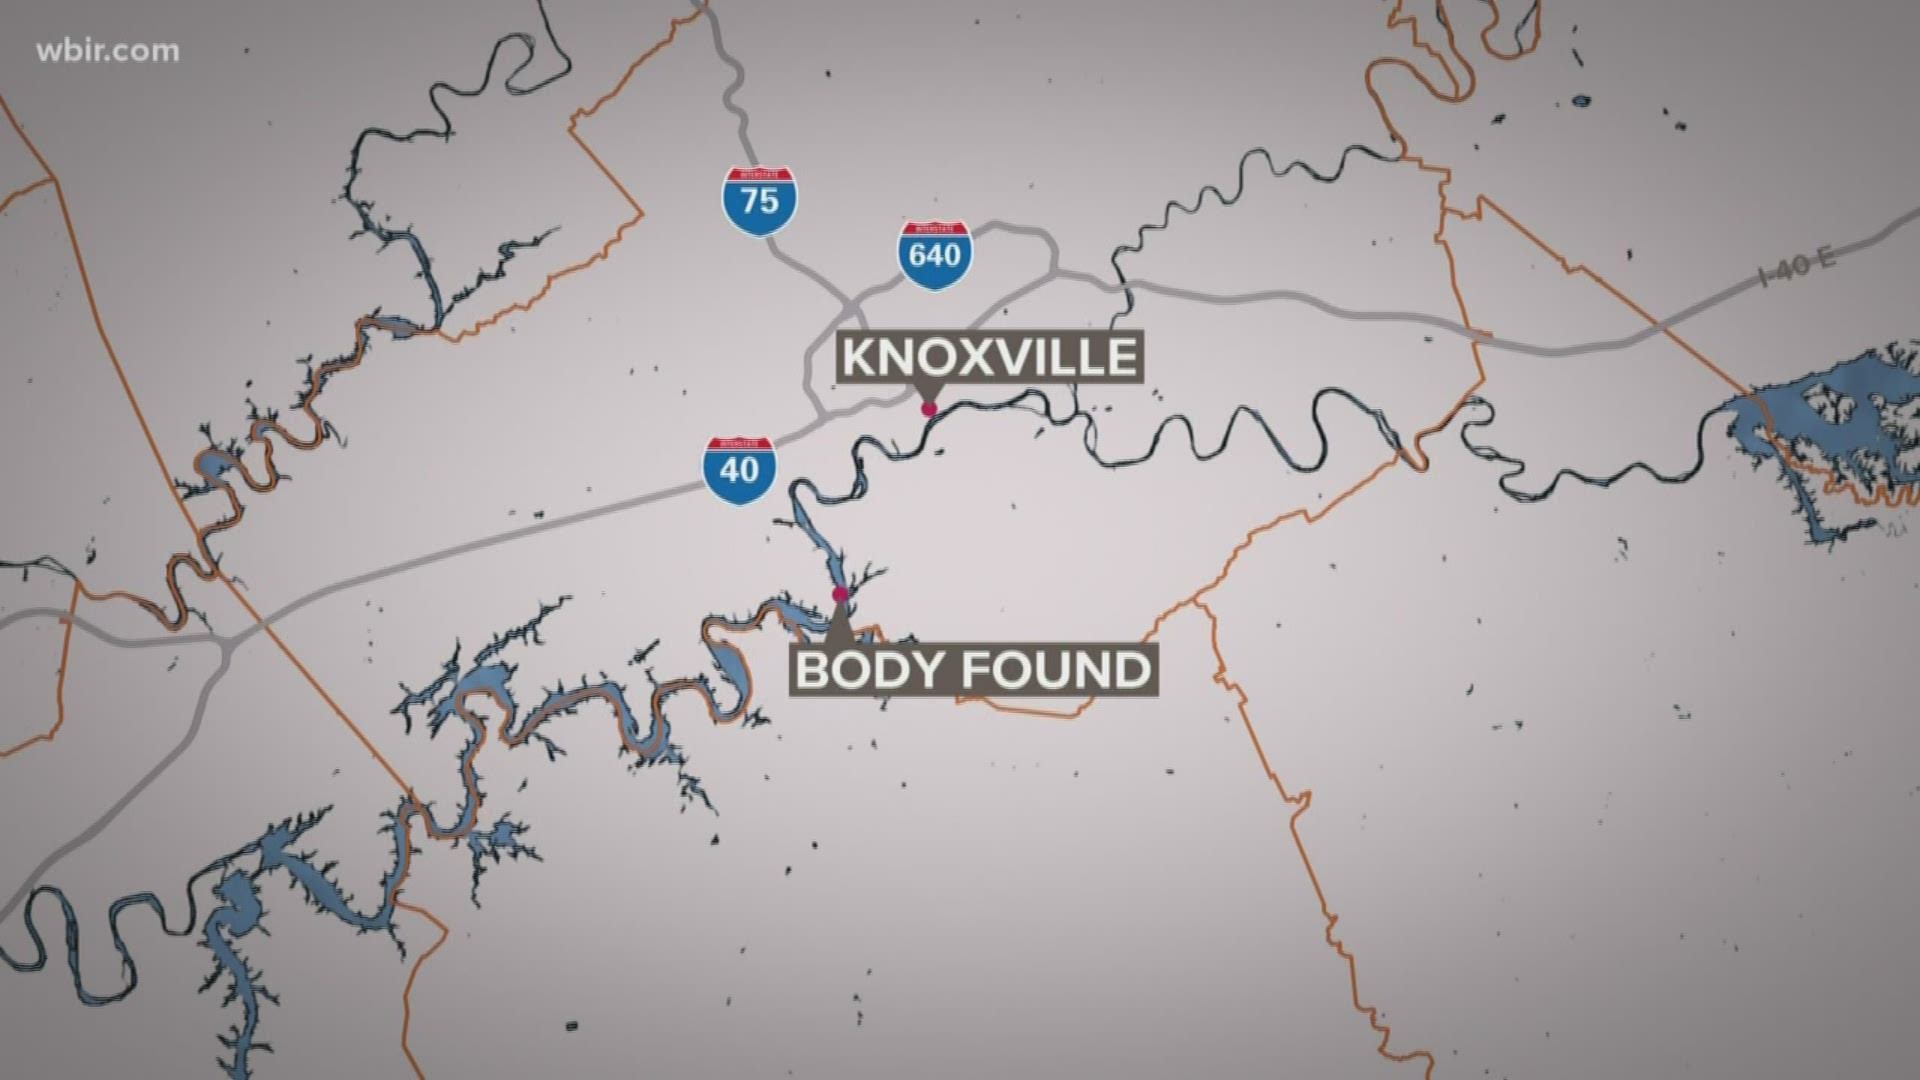 The Knoxville fire department says crews recovered a body from the Tennessee river.